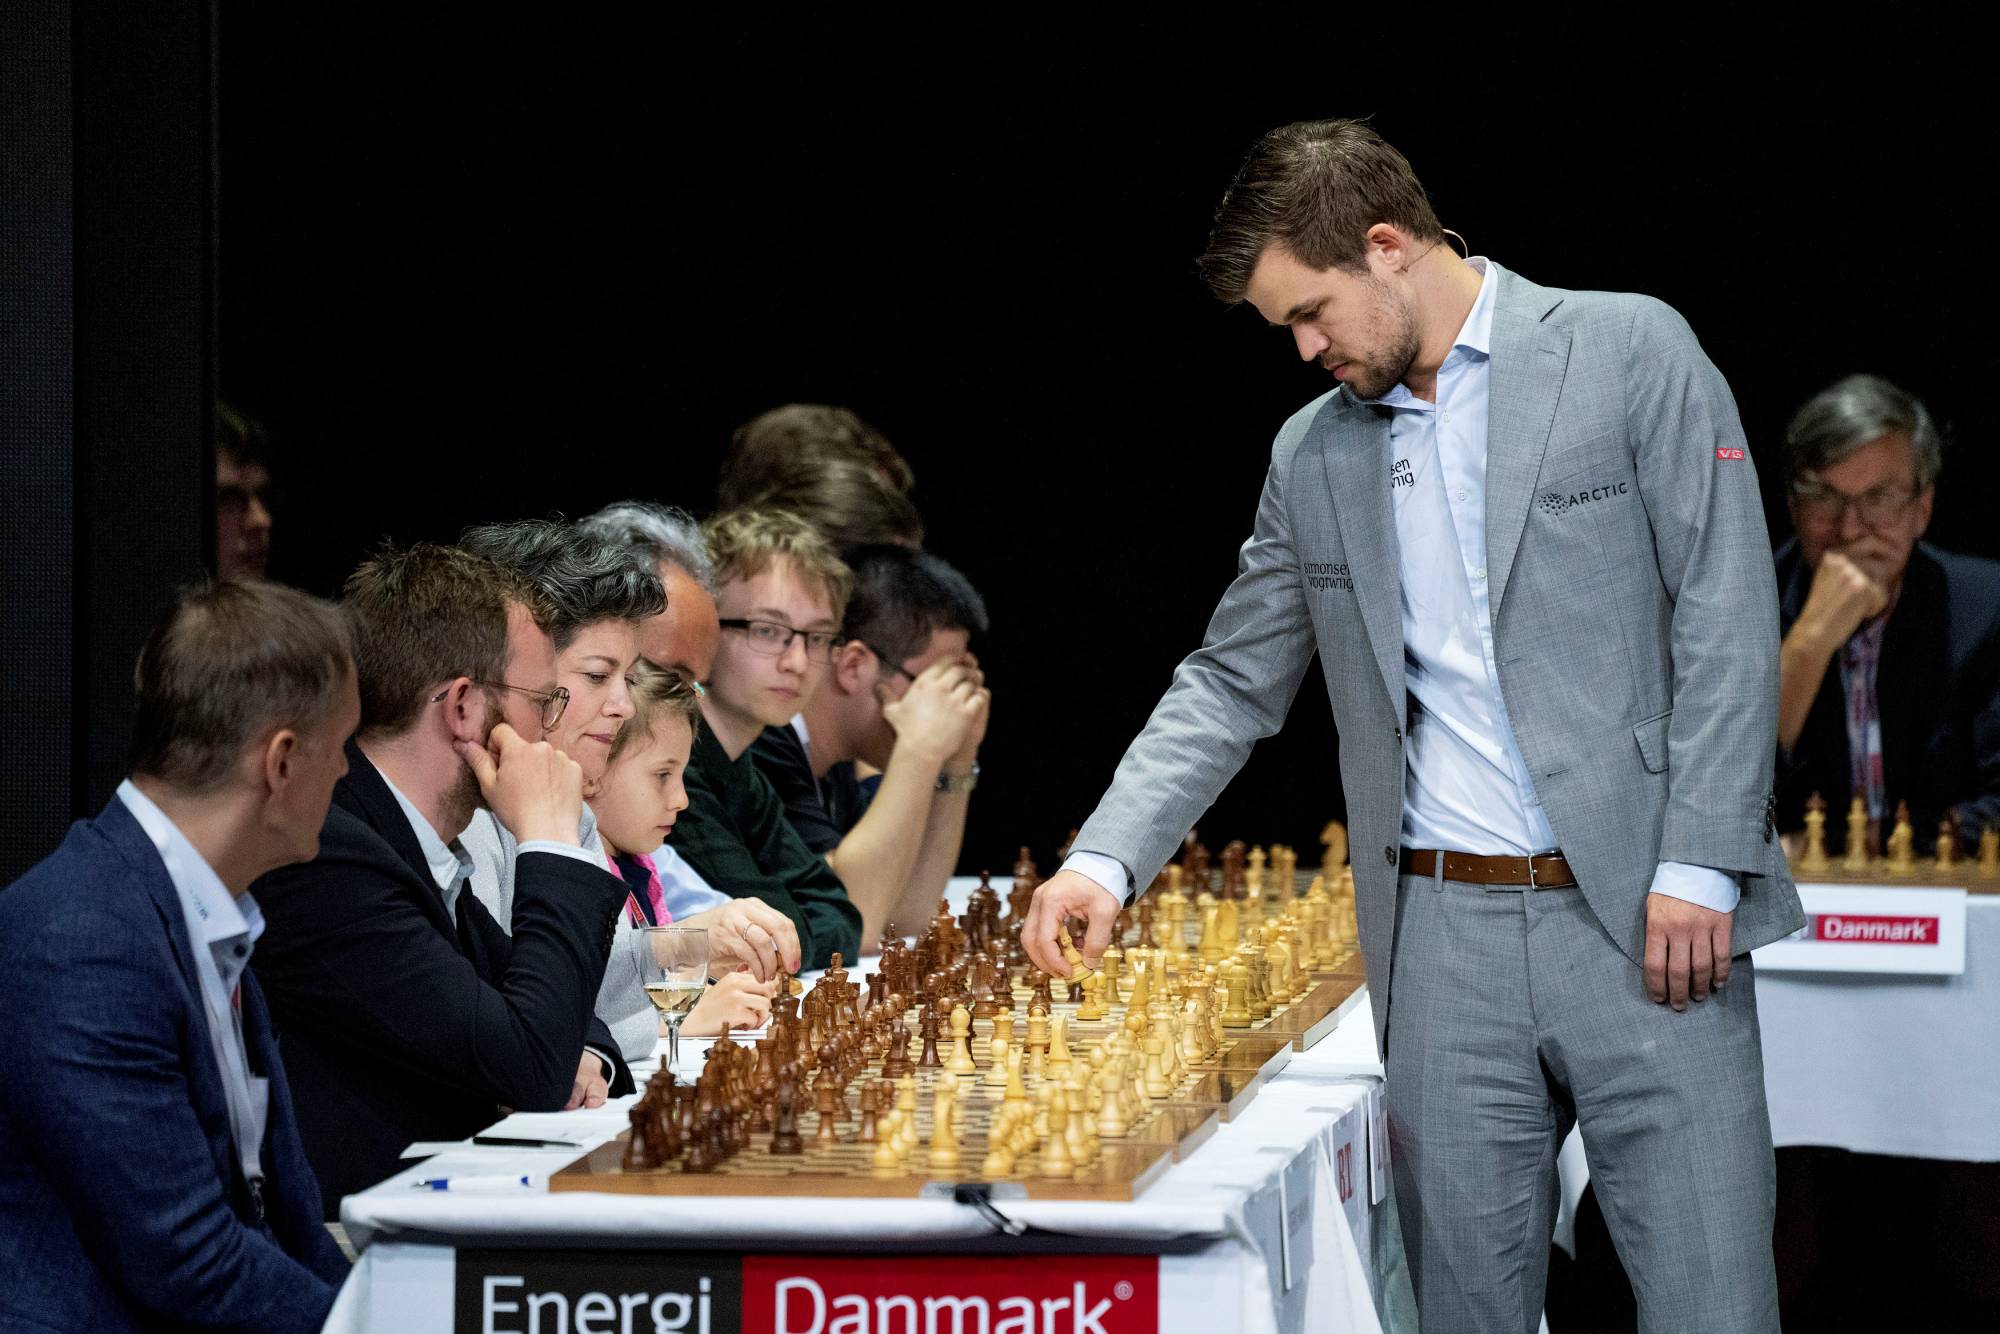 Chess cheating scandal: Why did Carlsen quit the match against Niemann?